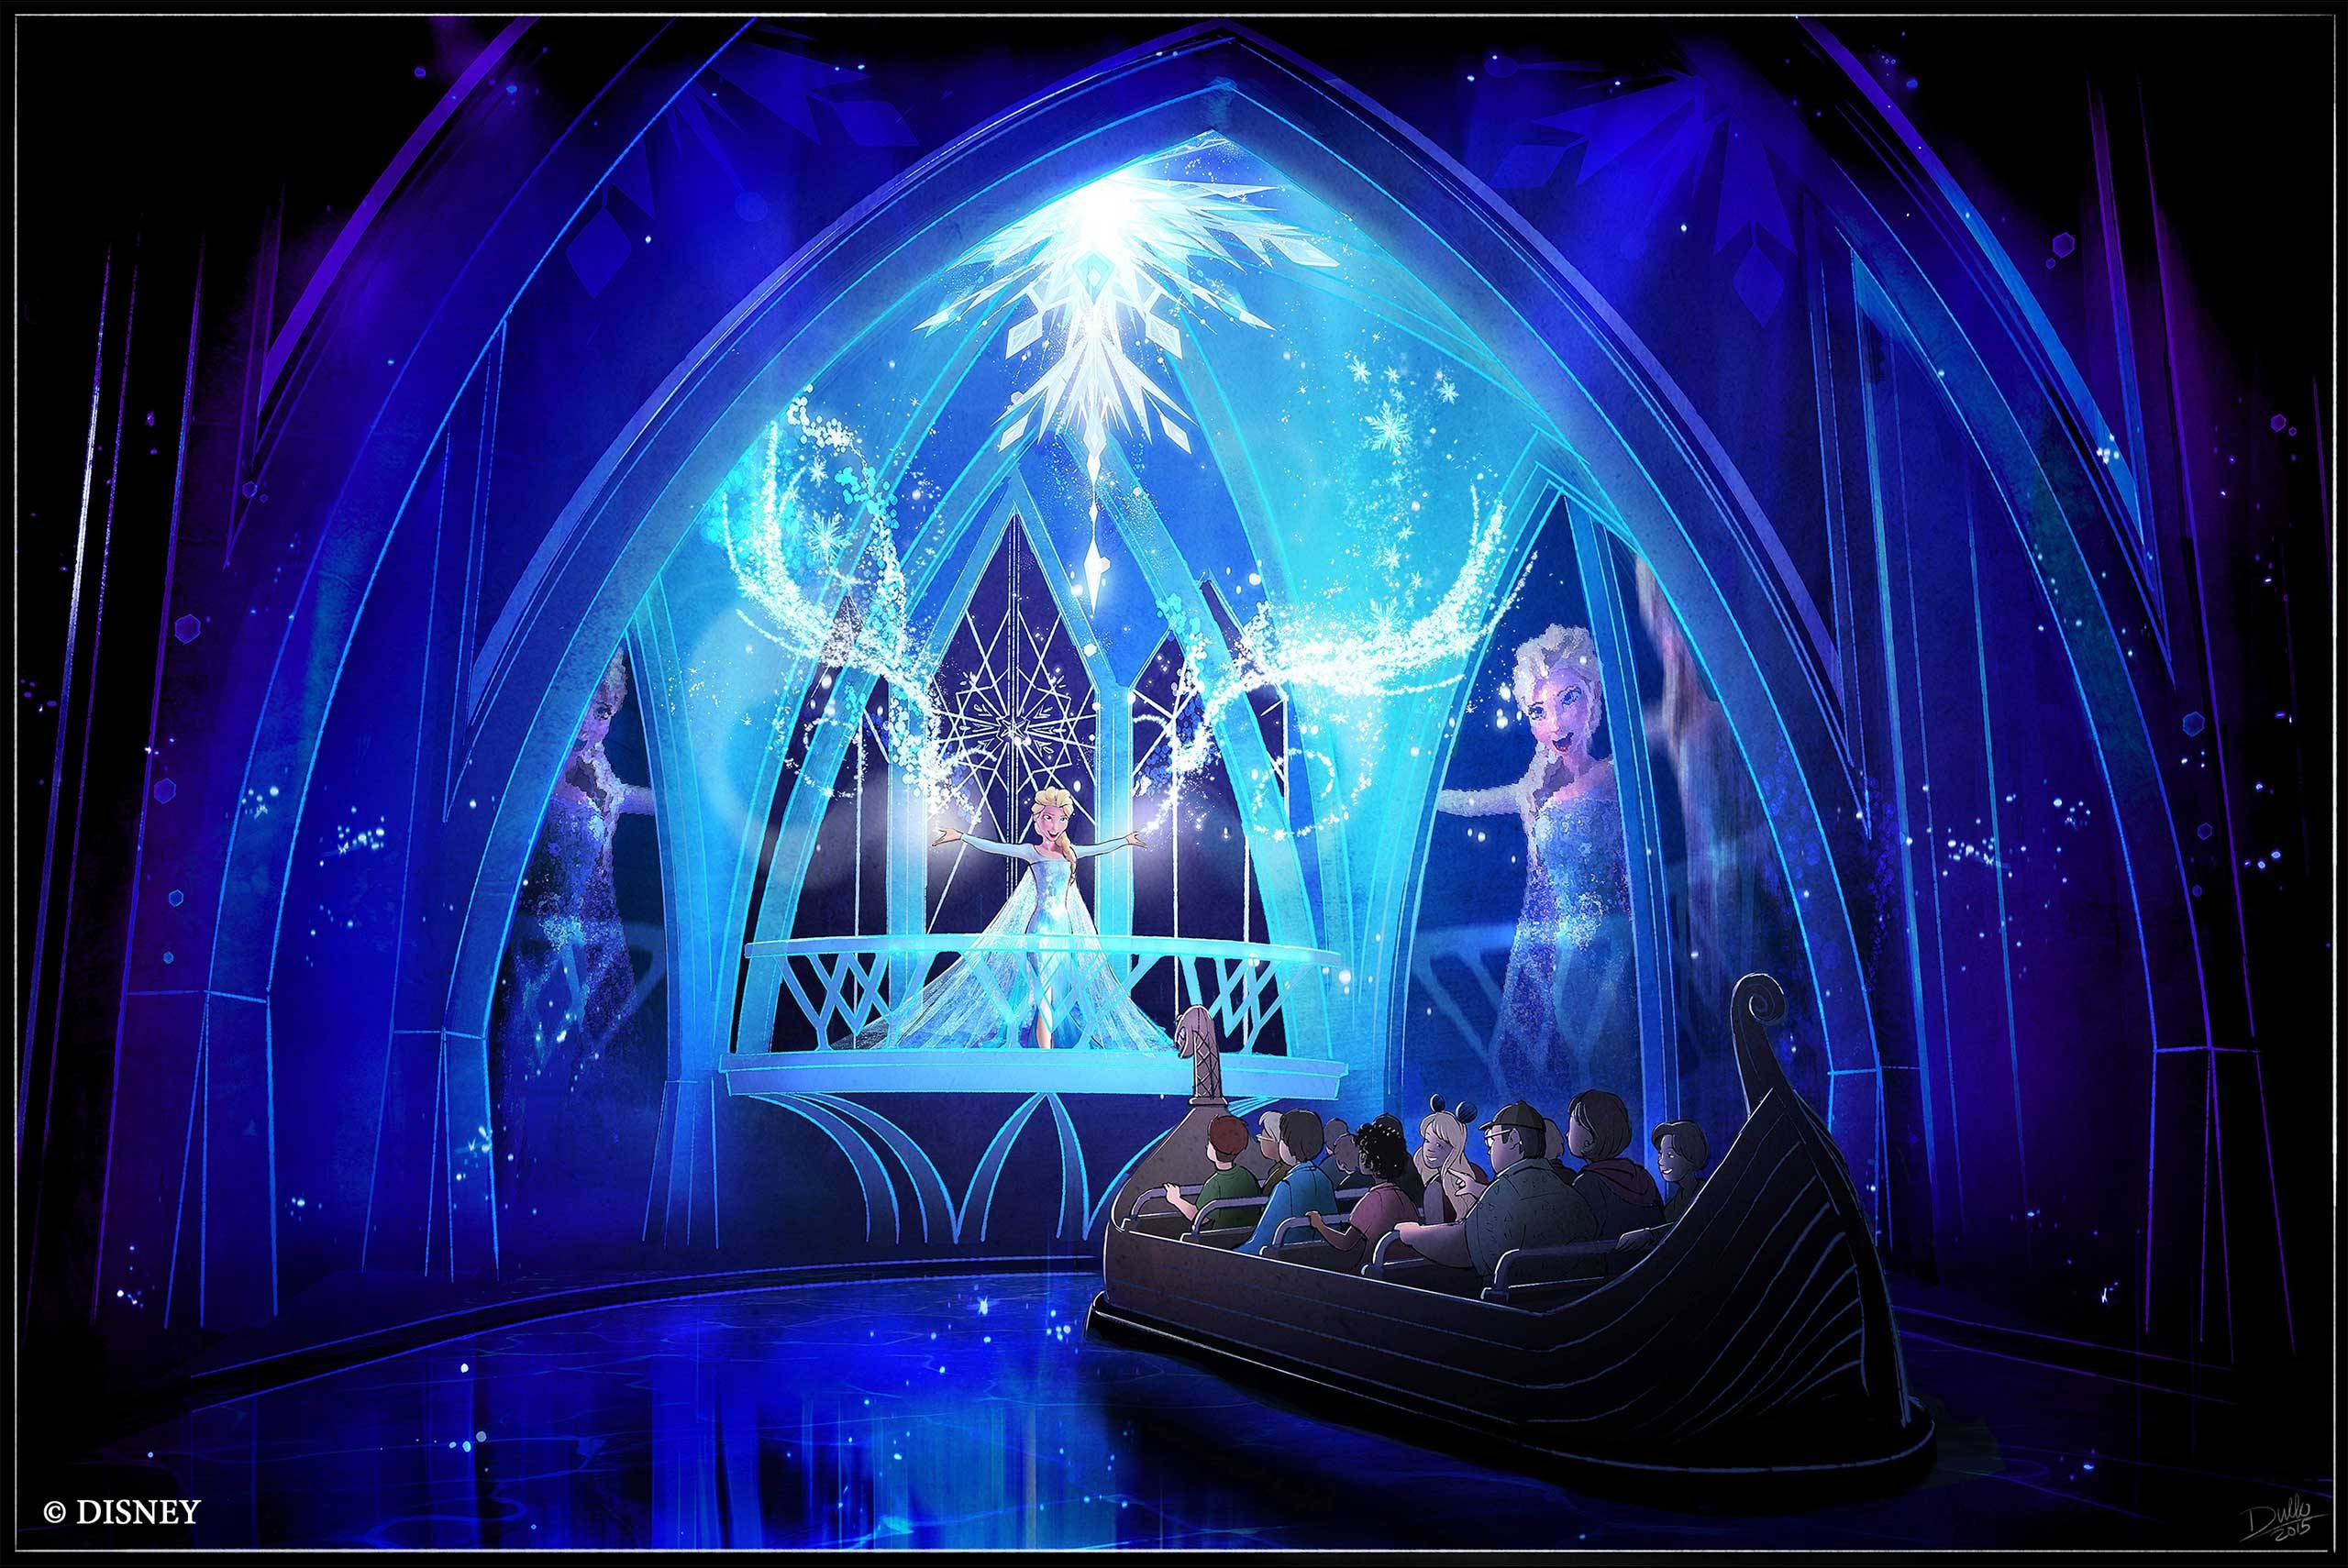 Disney confirms 'Frozen' makeover coming to Epcot's Norway Pavilion